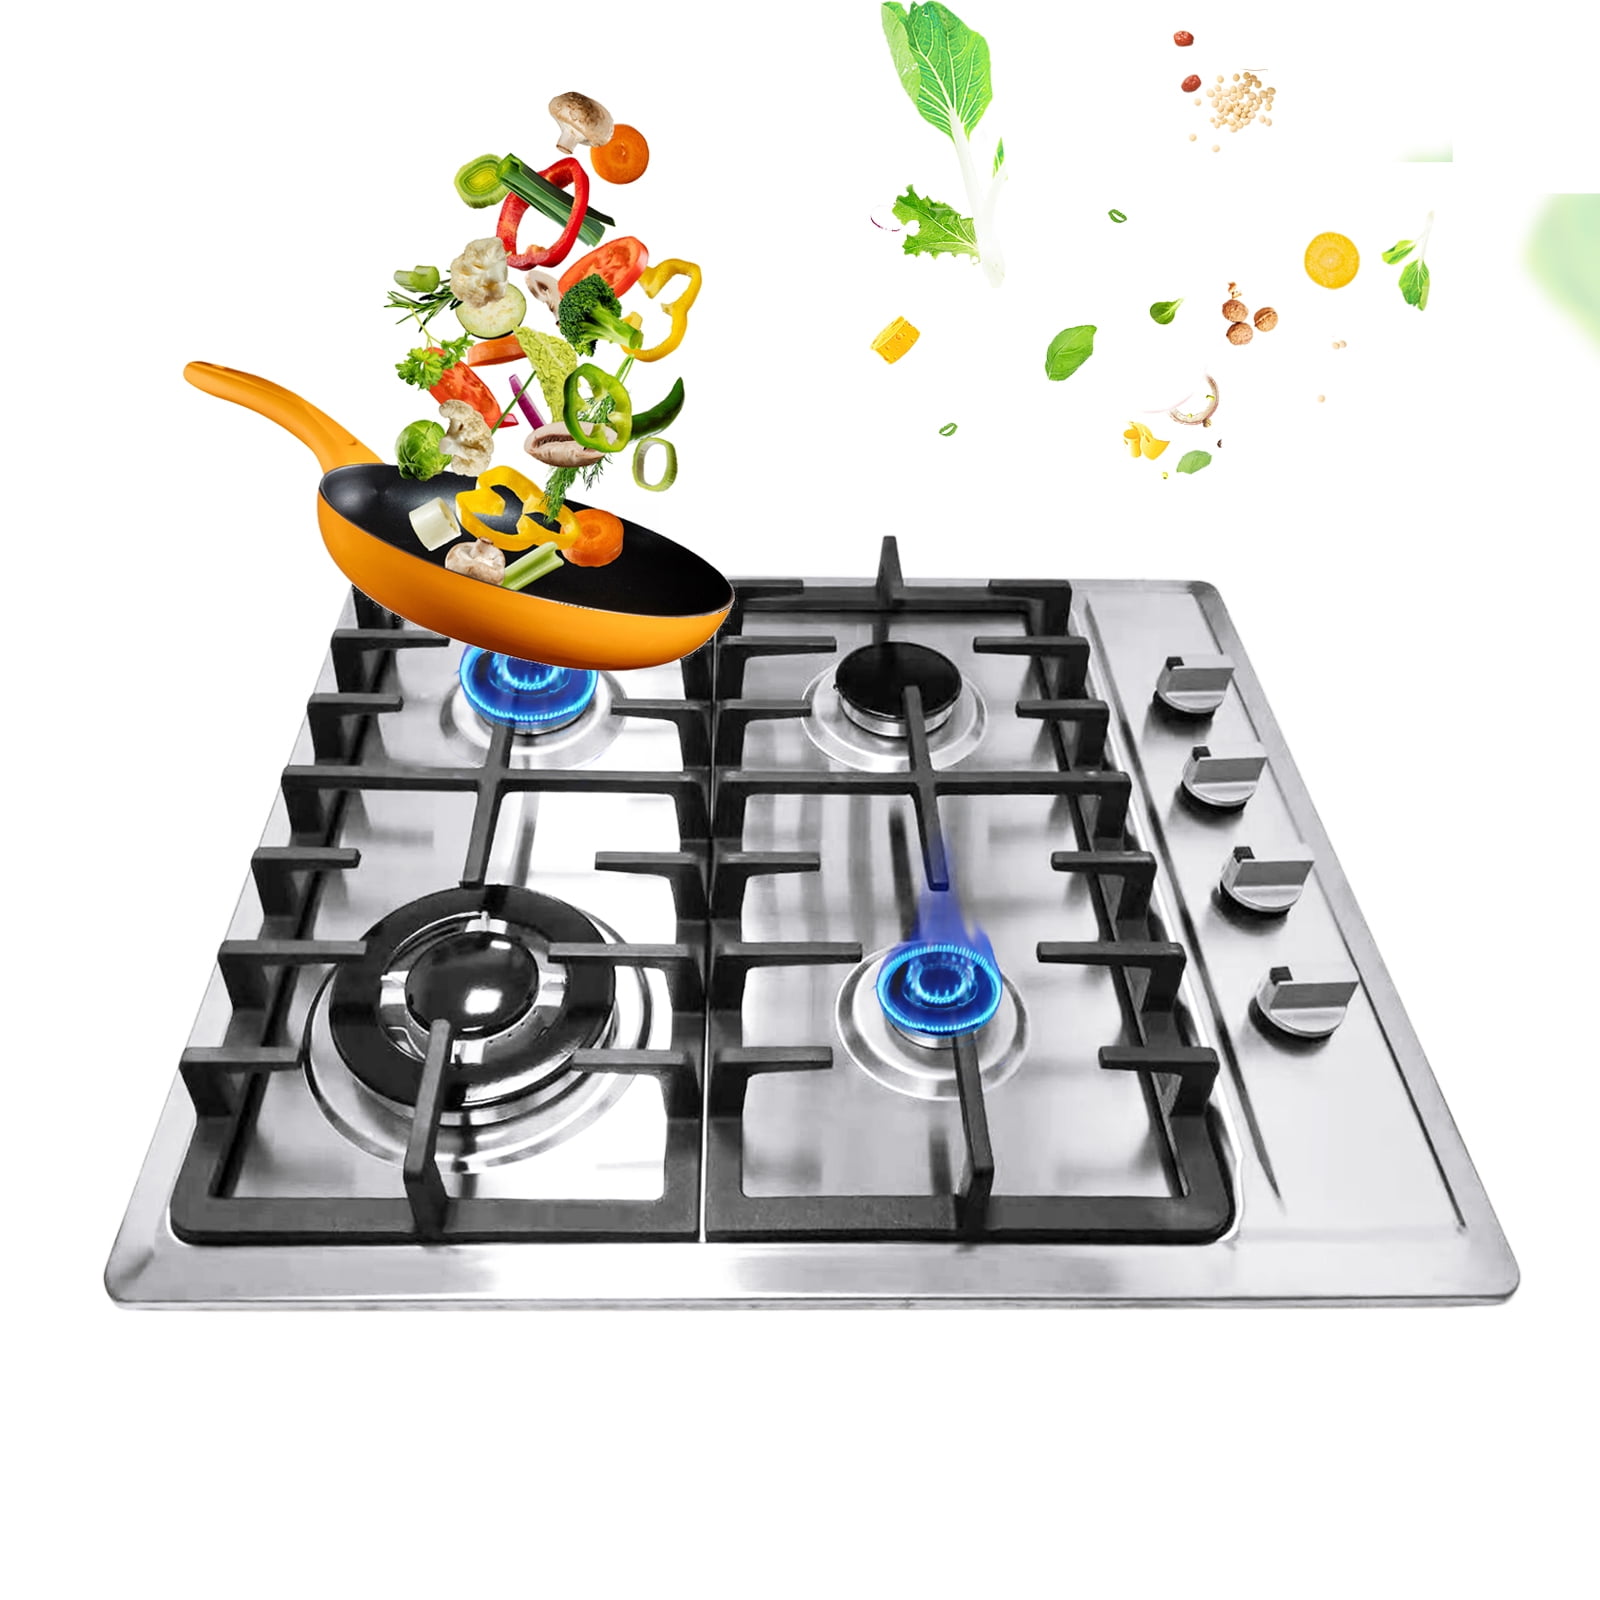 Gas Cooktop NG/LPG Gas Stove Cooktop Stove Burner Tempered Glass Cook Top Built in 4 Burners Gas Hob Grate Stovetop Cooker 4 Burners, 23 x 20 